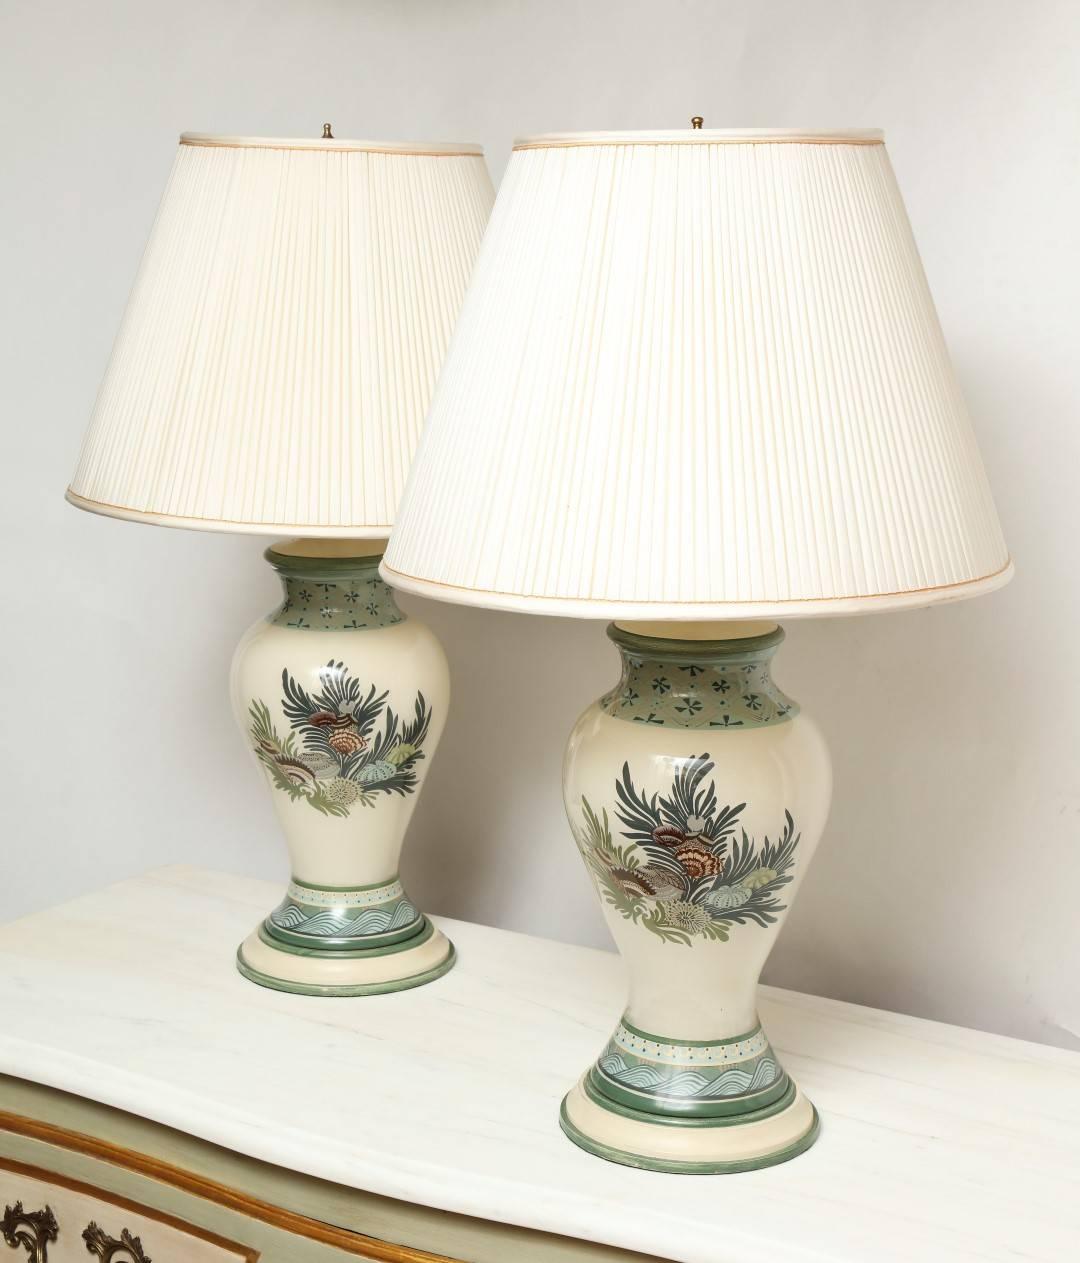 A pair of reverse glass painted lamps, the baluster shaped body depicting a foliage motif in complementary shades of green, with custom-made base and custom-made lamp shades included.

30